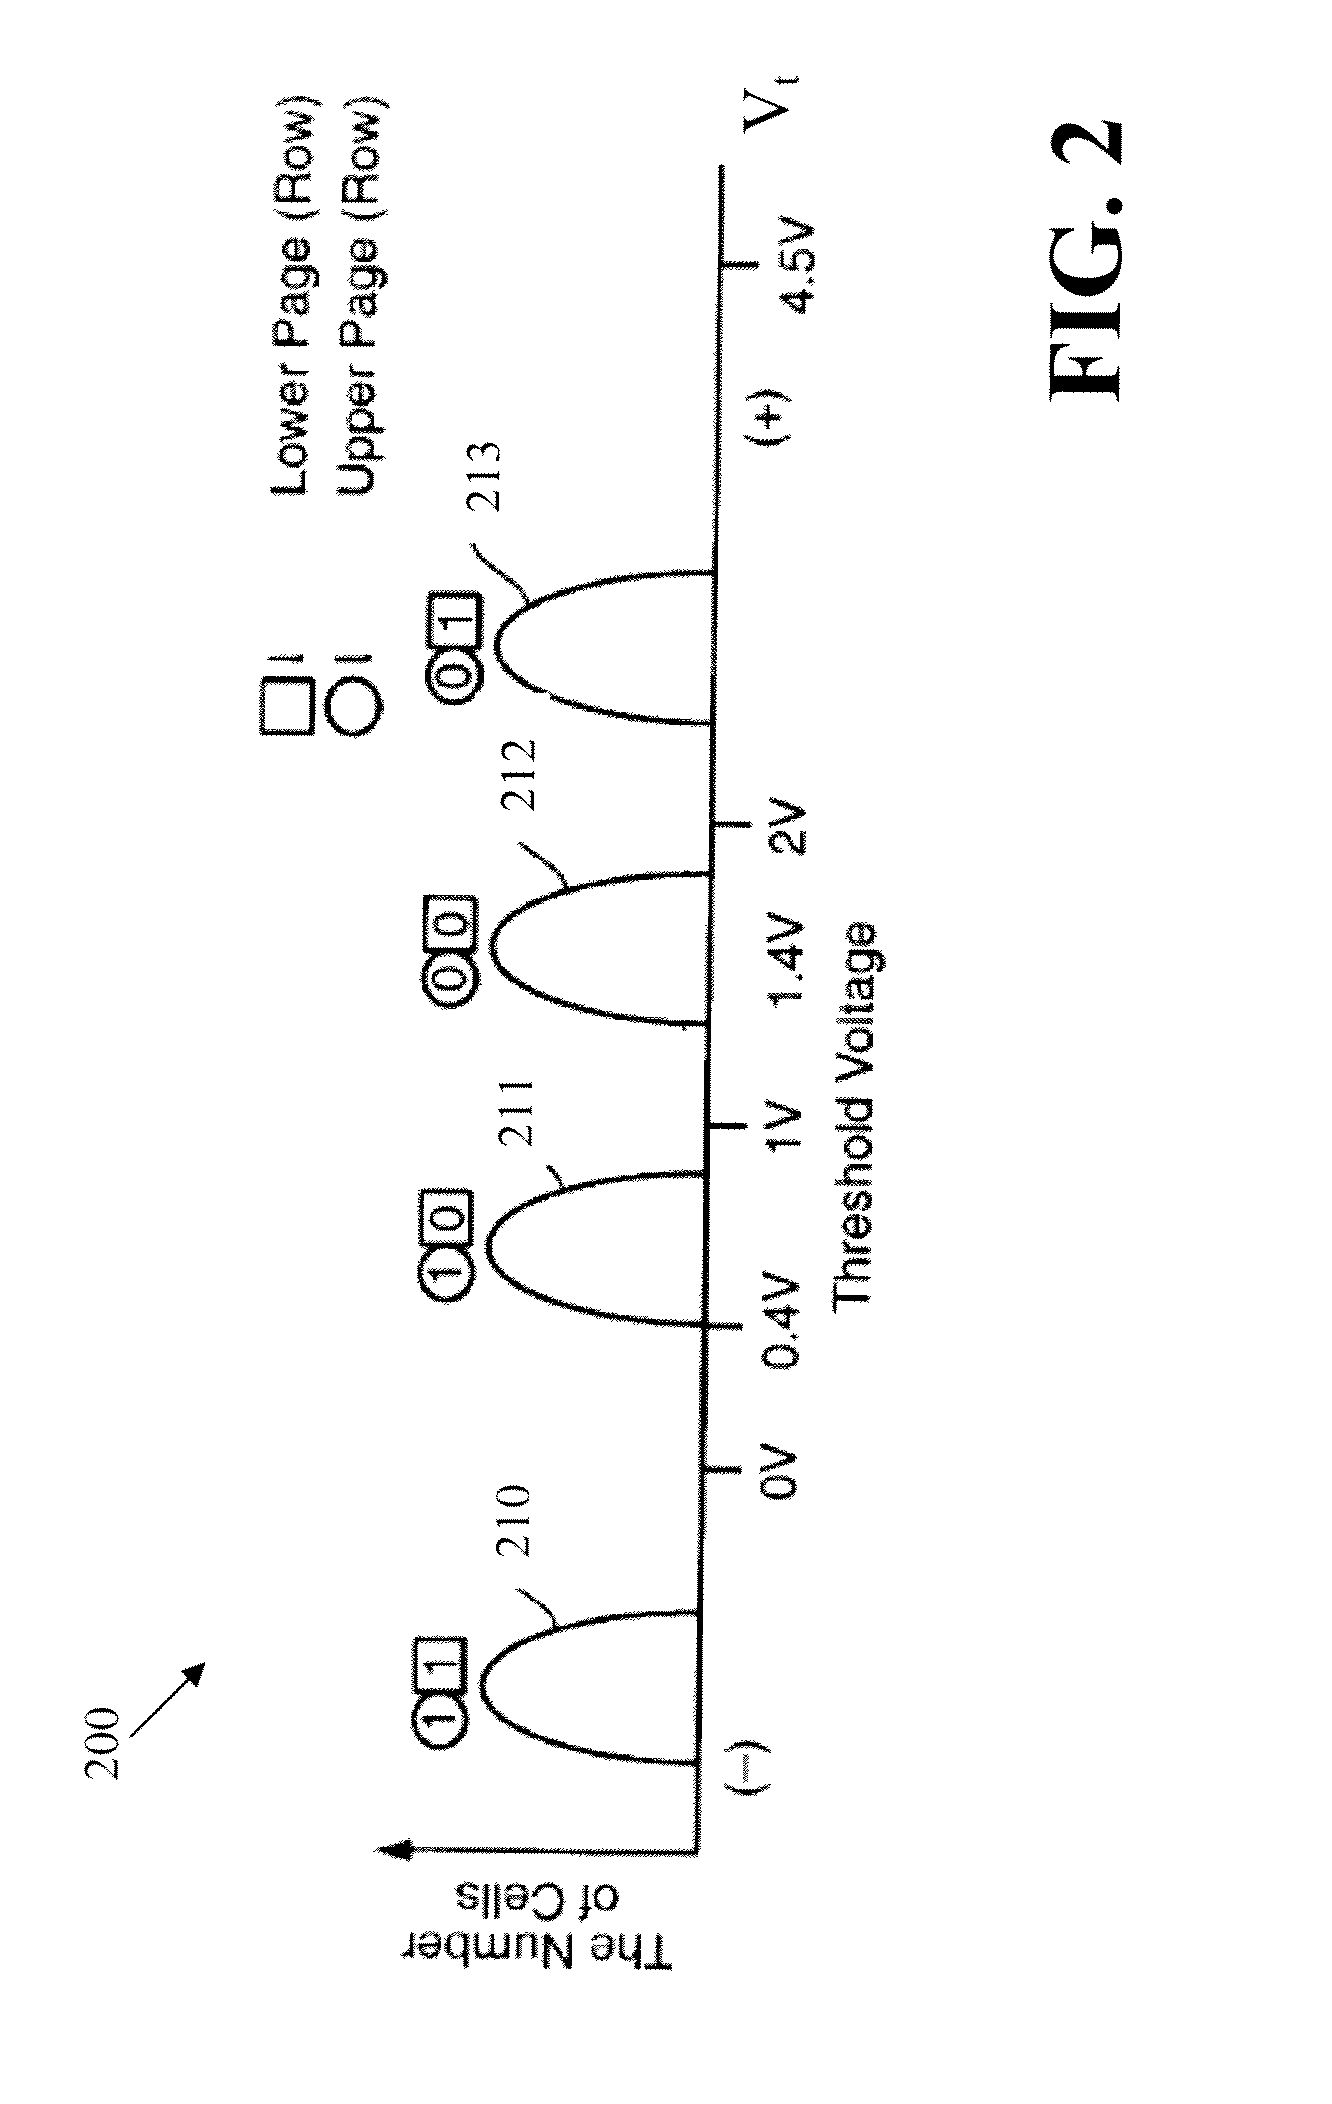 Methods and apparatus for computing a probability value of a received value in communication or storage systems